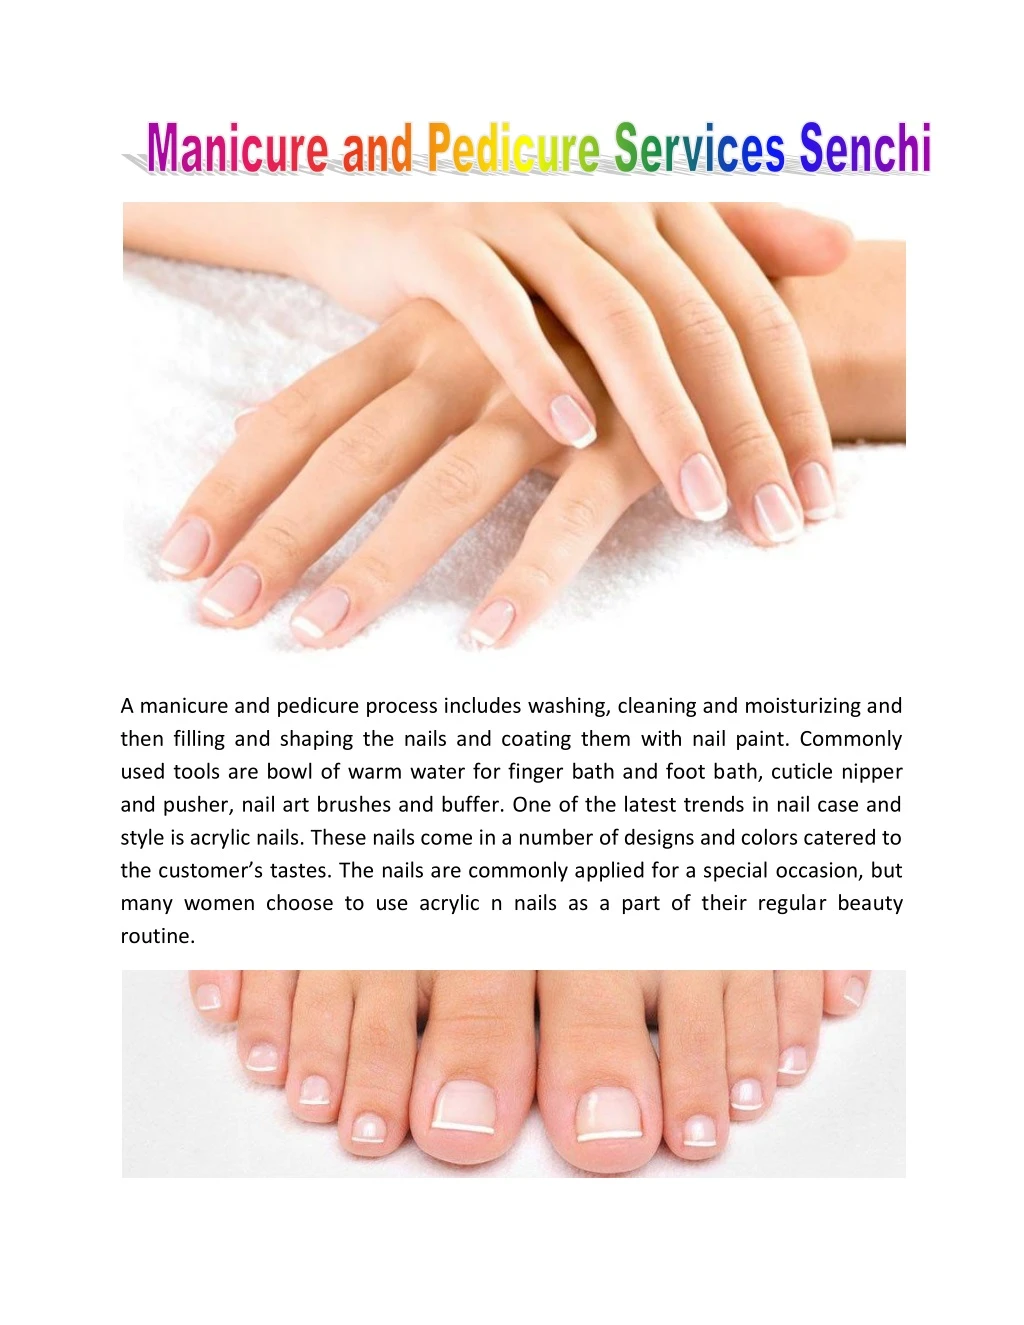 a manicure and pedicure process includes washing